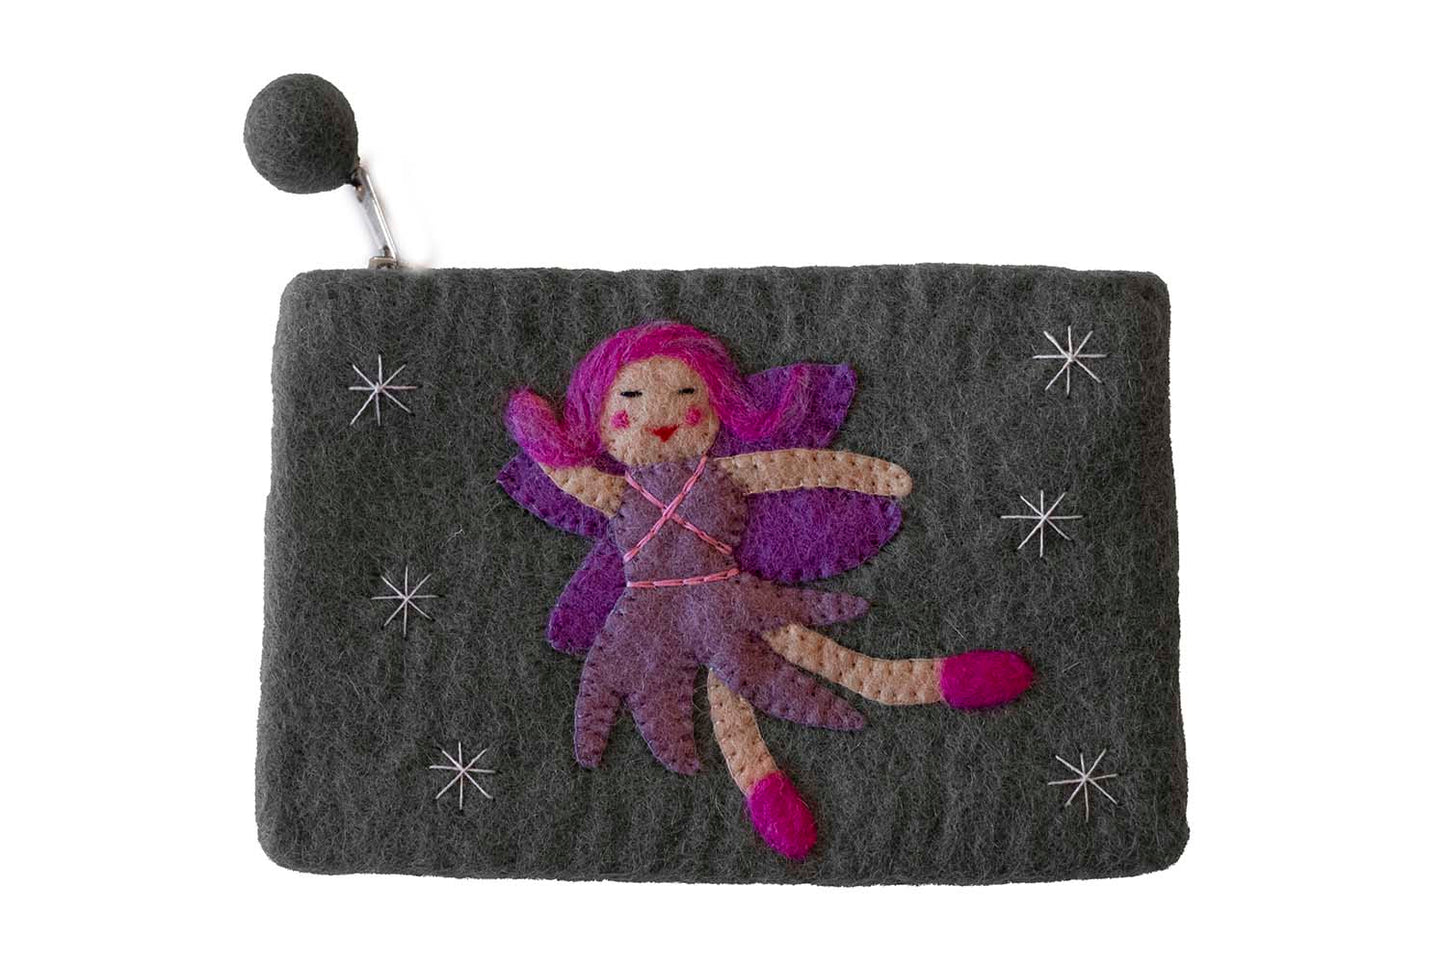 This Global Groove Life, handmade, ethical, fair trade, eco-friendly, sustainable, grey felt zipper coin pouch was created by artisans in Kathmandu Nepal and is adorned with an adorable fairy with stars motif.